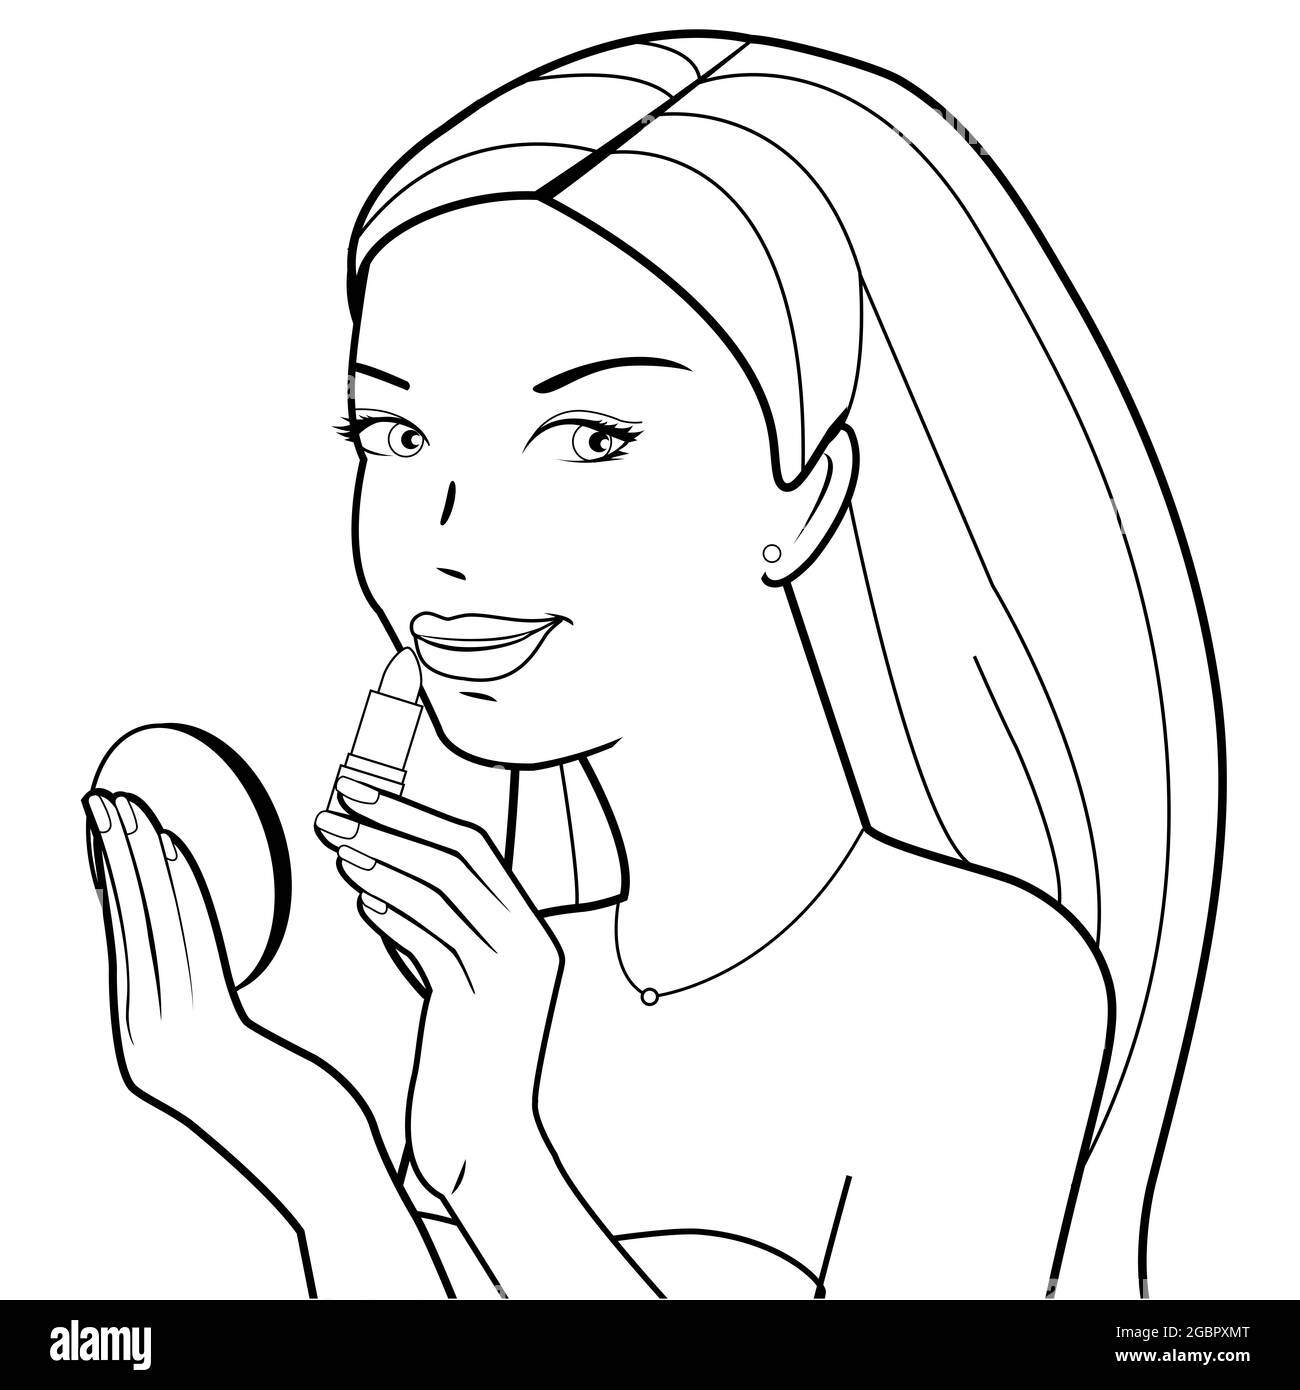 A beautiful young woman putting on her lipstick. Black and white illustration Stock Photo